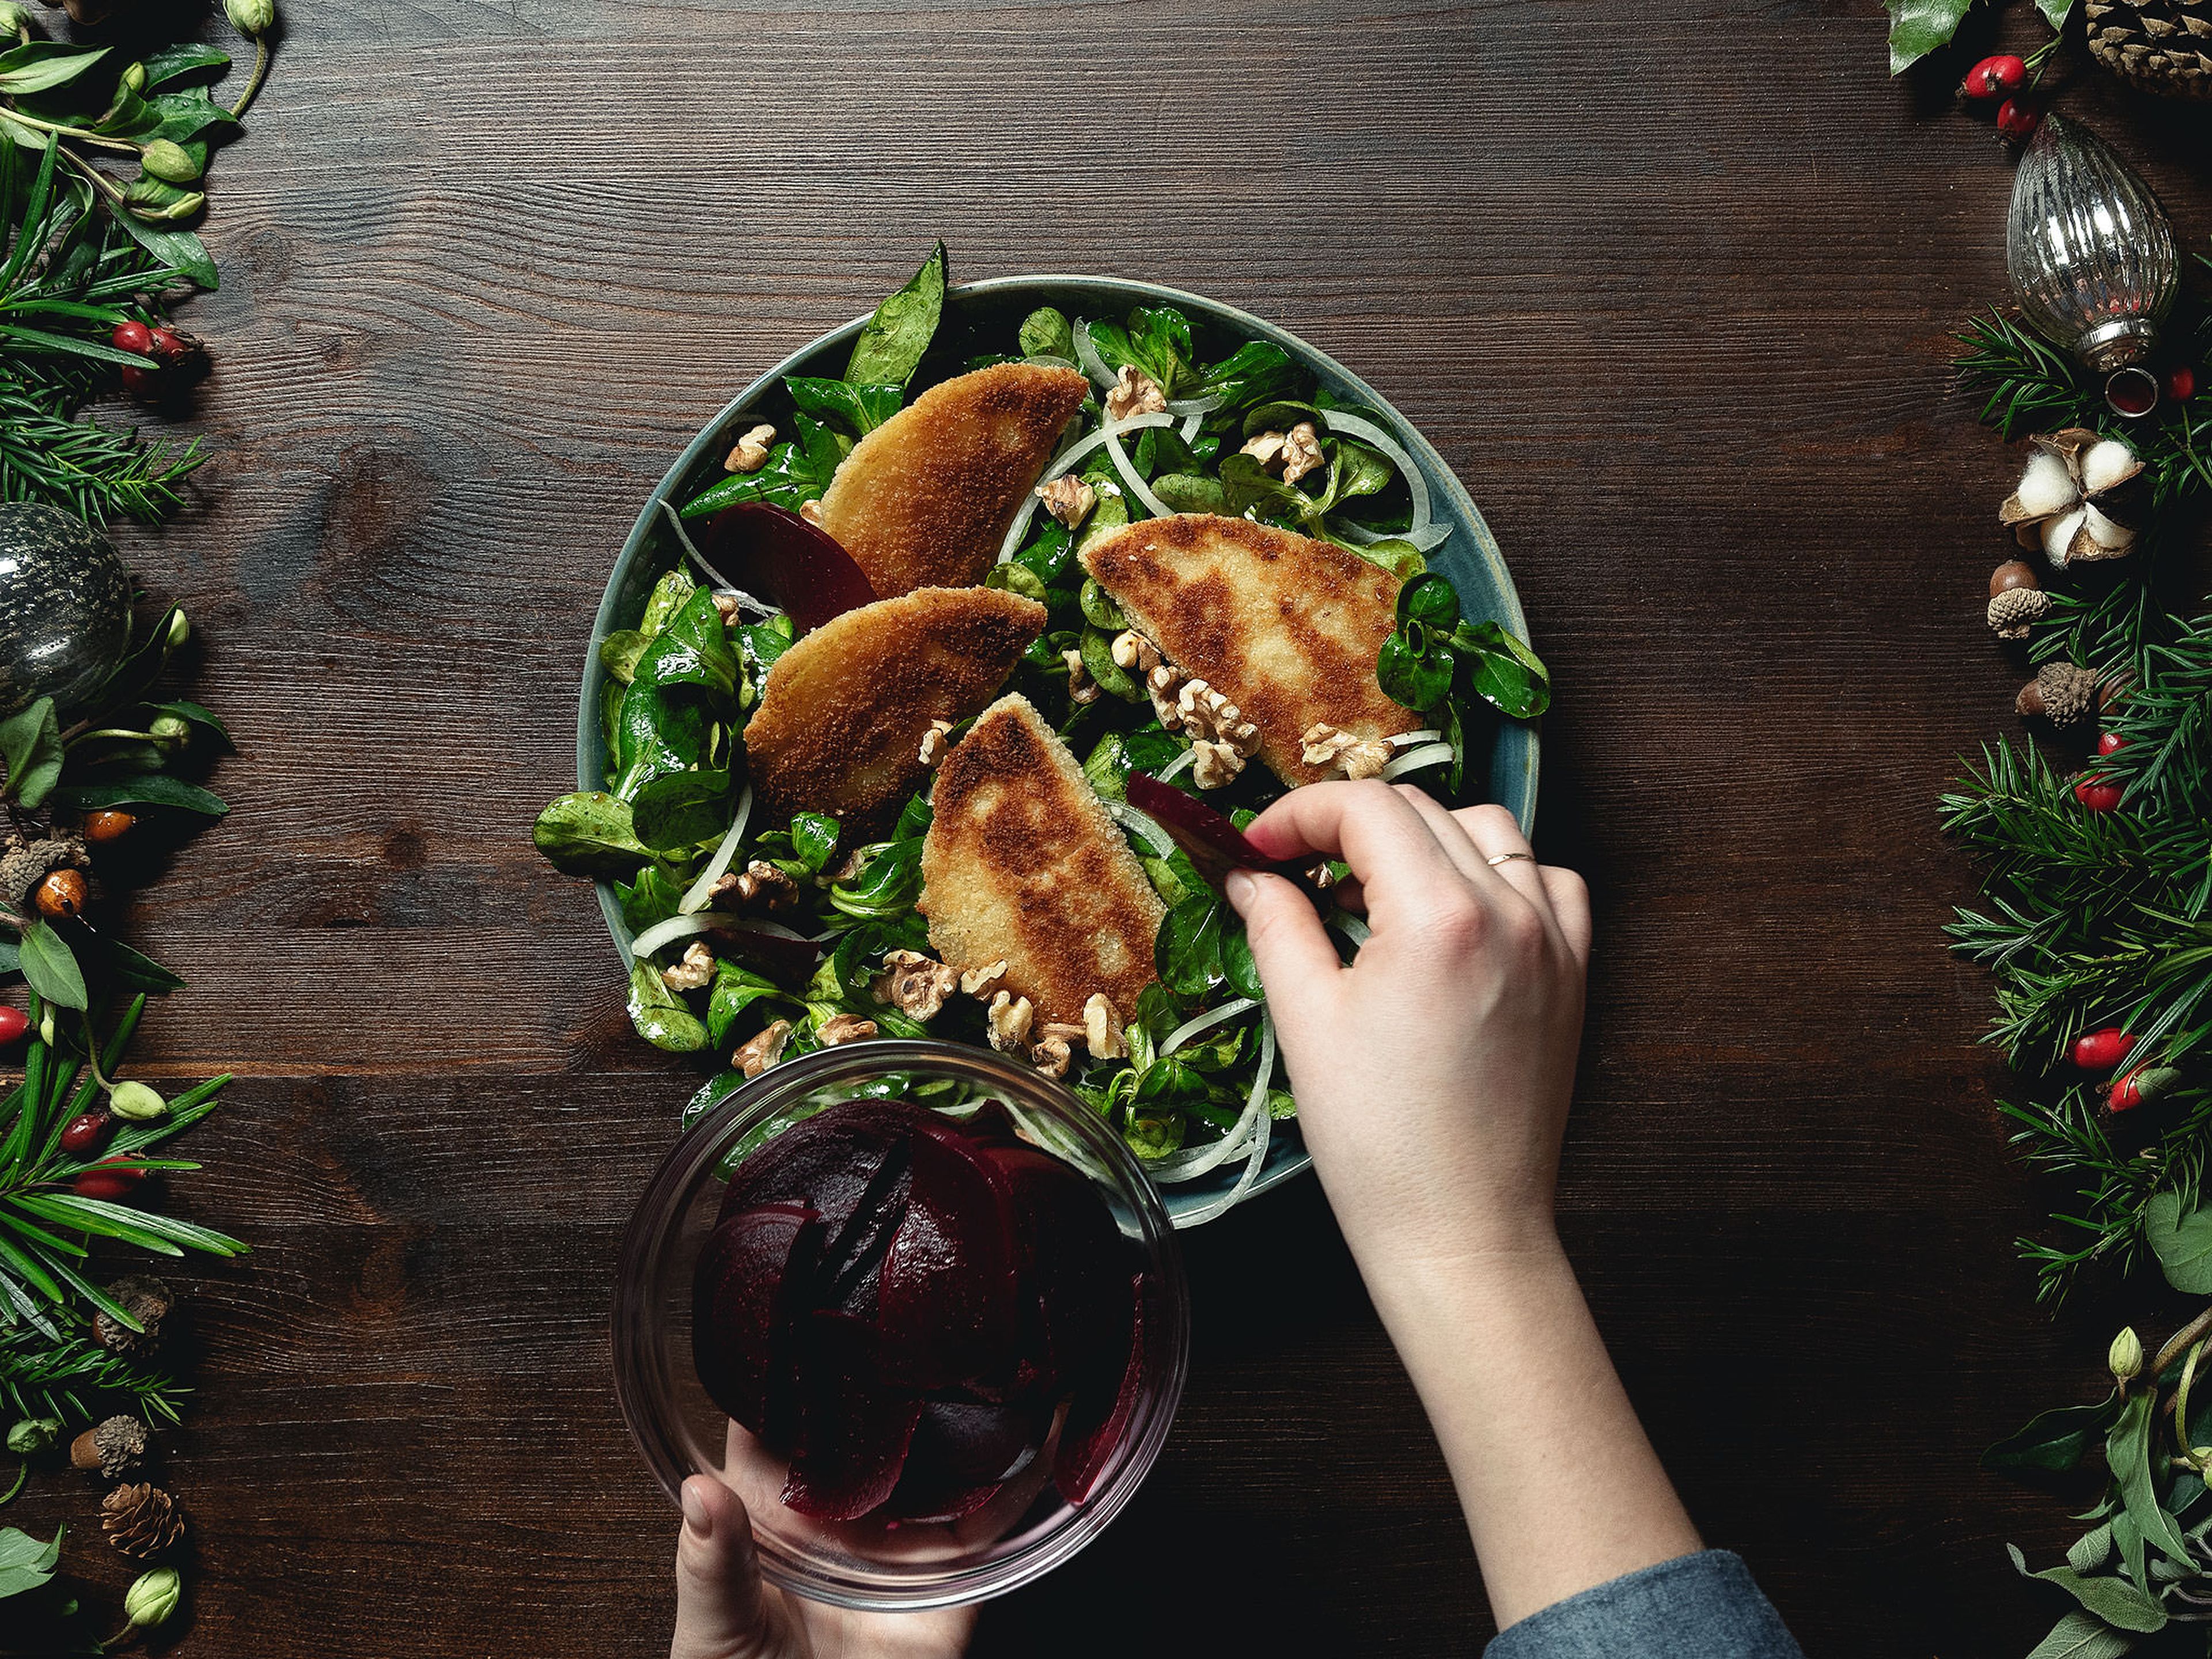 In a large bowl whisk together the balsamic vinegar, pumpkin seed oil, and honey and season with salt and pepper. Add lamb’s lettuce, toss to combine, and transfer to a serving plate. Arrange onion, fried cheese pockets, walnuts, and beets over the salad. Serve immediately and enjoy!